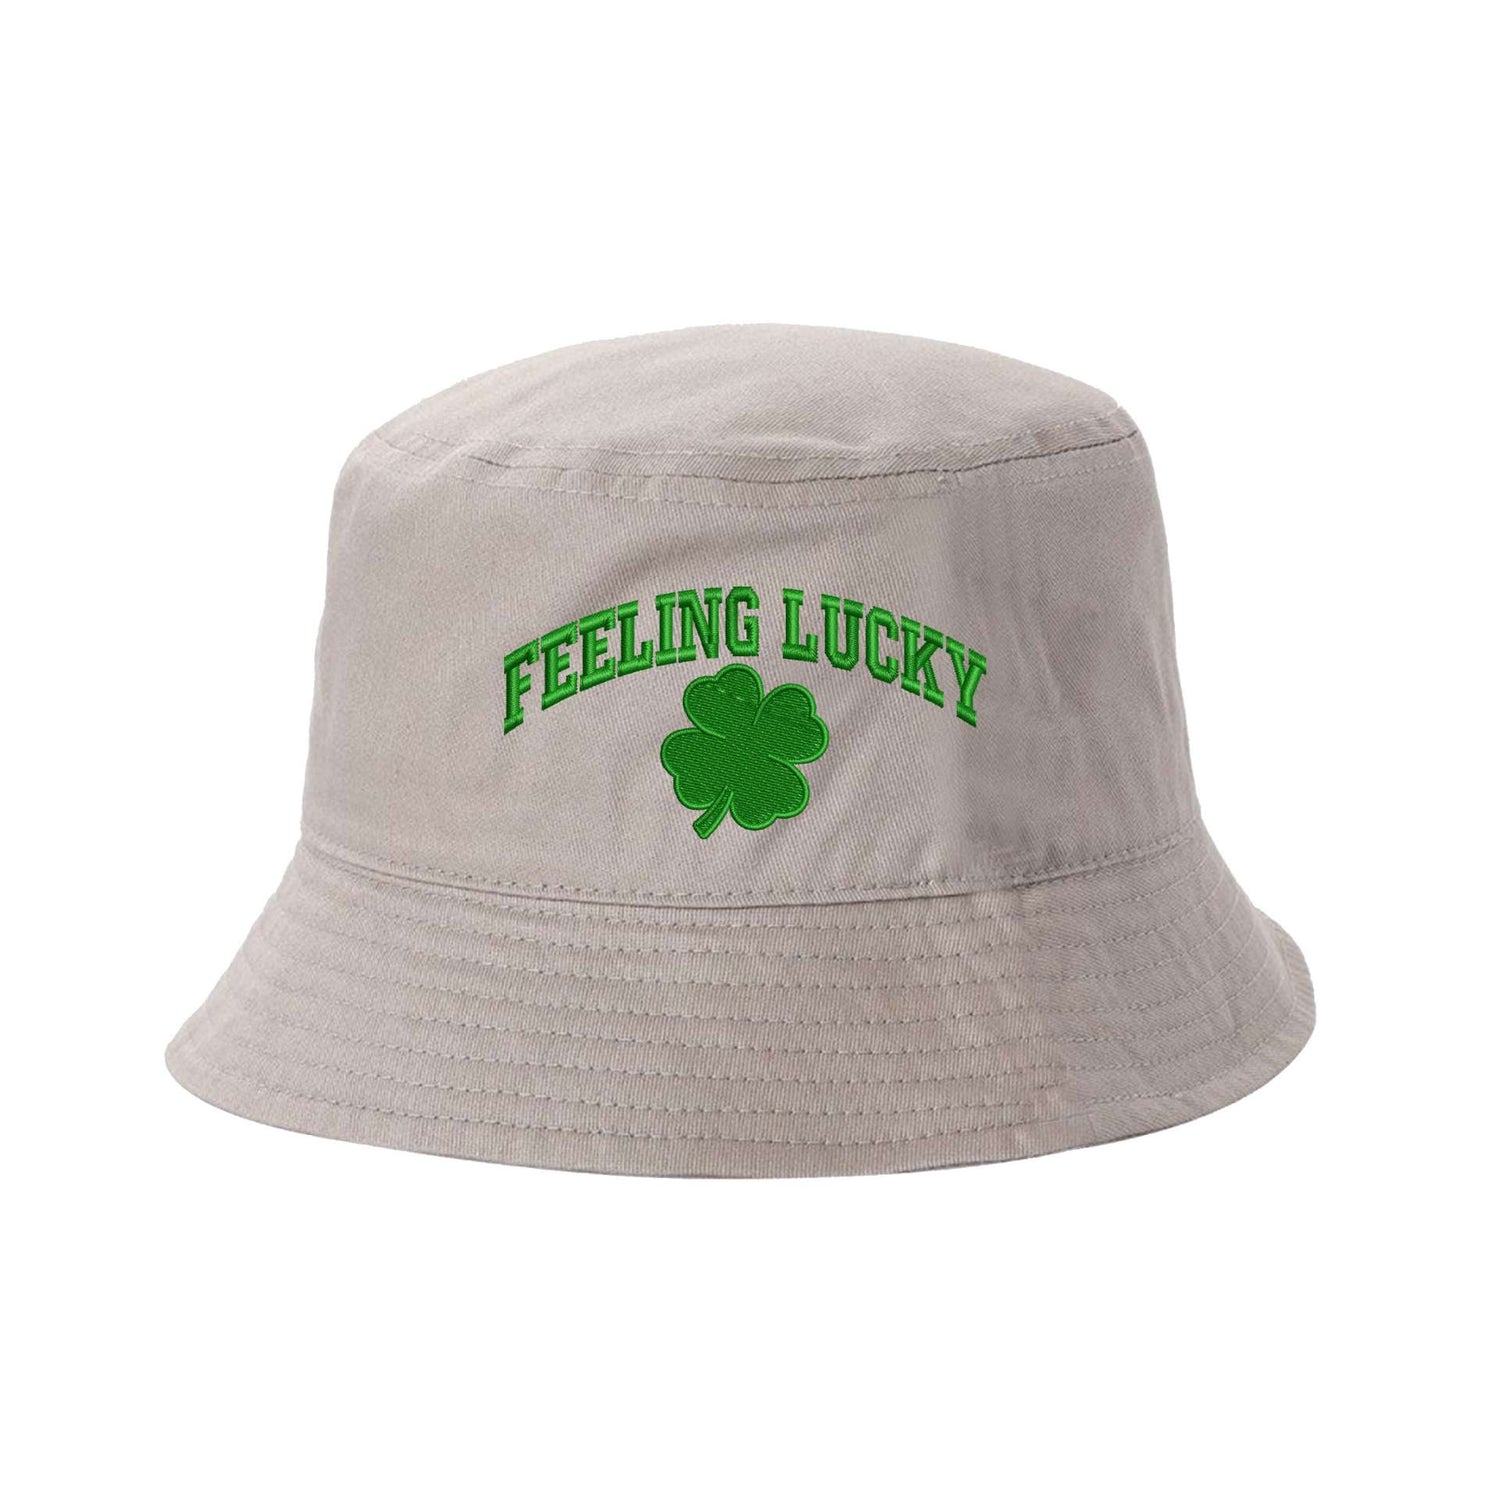 Khaki Bucket Hat embroidered with Feeling Lucky - DSY Lifestyle